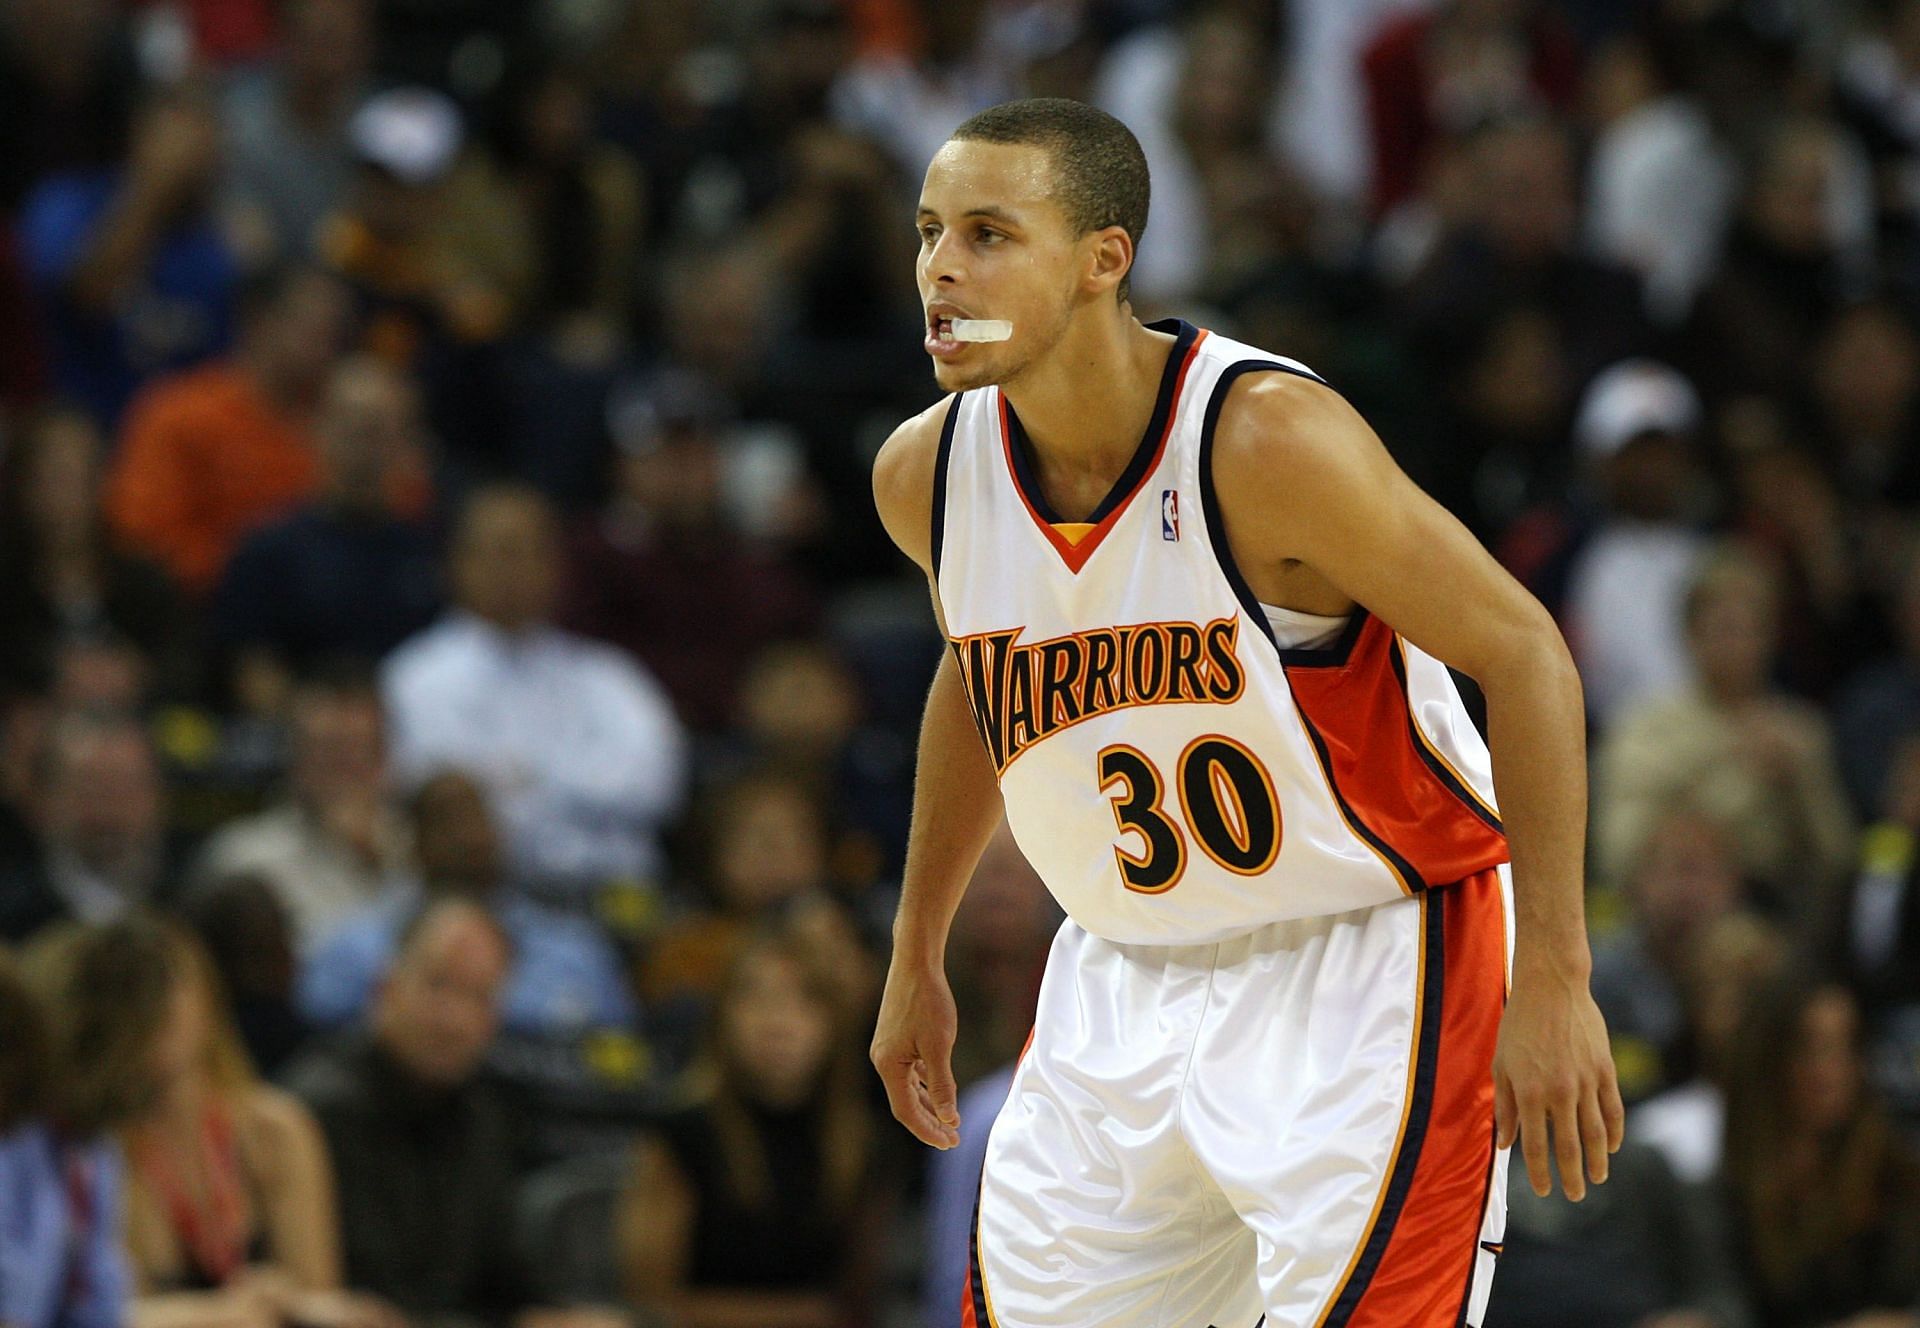 Steph Curry of the Golden State Warriors in his rookie season